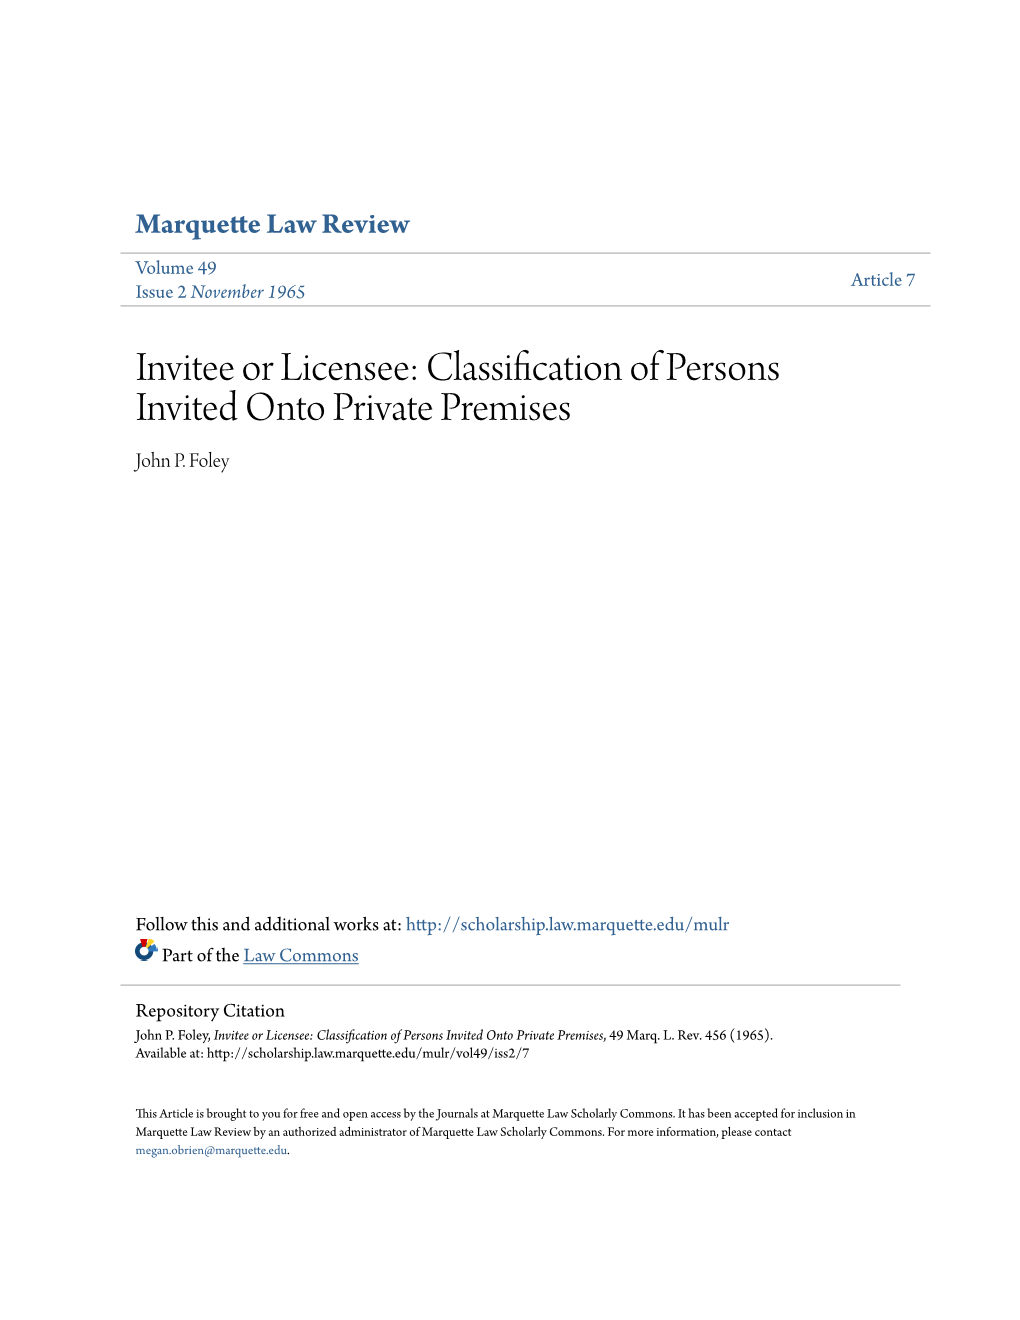 Invitee Or Licensee: Classification of Persons Invited Onto Private Premises John P